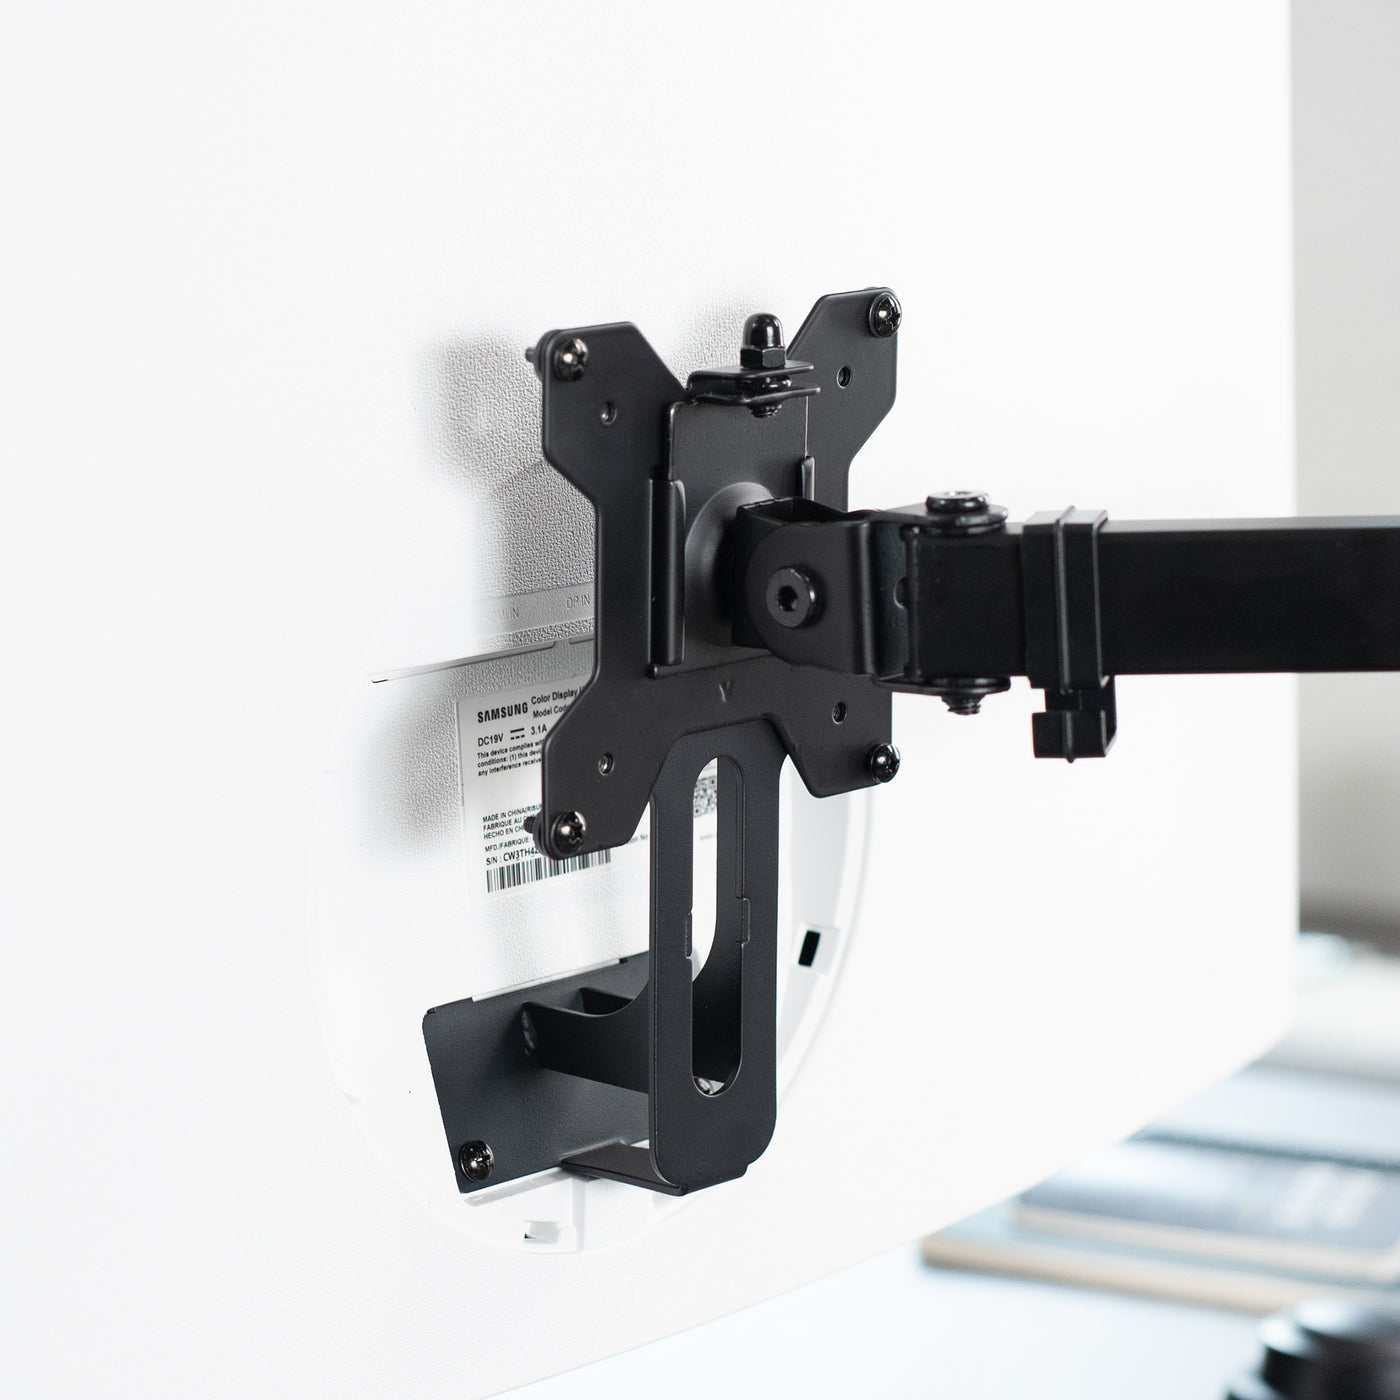 VESA Adapter Designed for the Compatible Samsung UR591C Series allows your non VESA compatible monitor to be mounted to a stand of your choice.